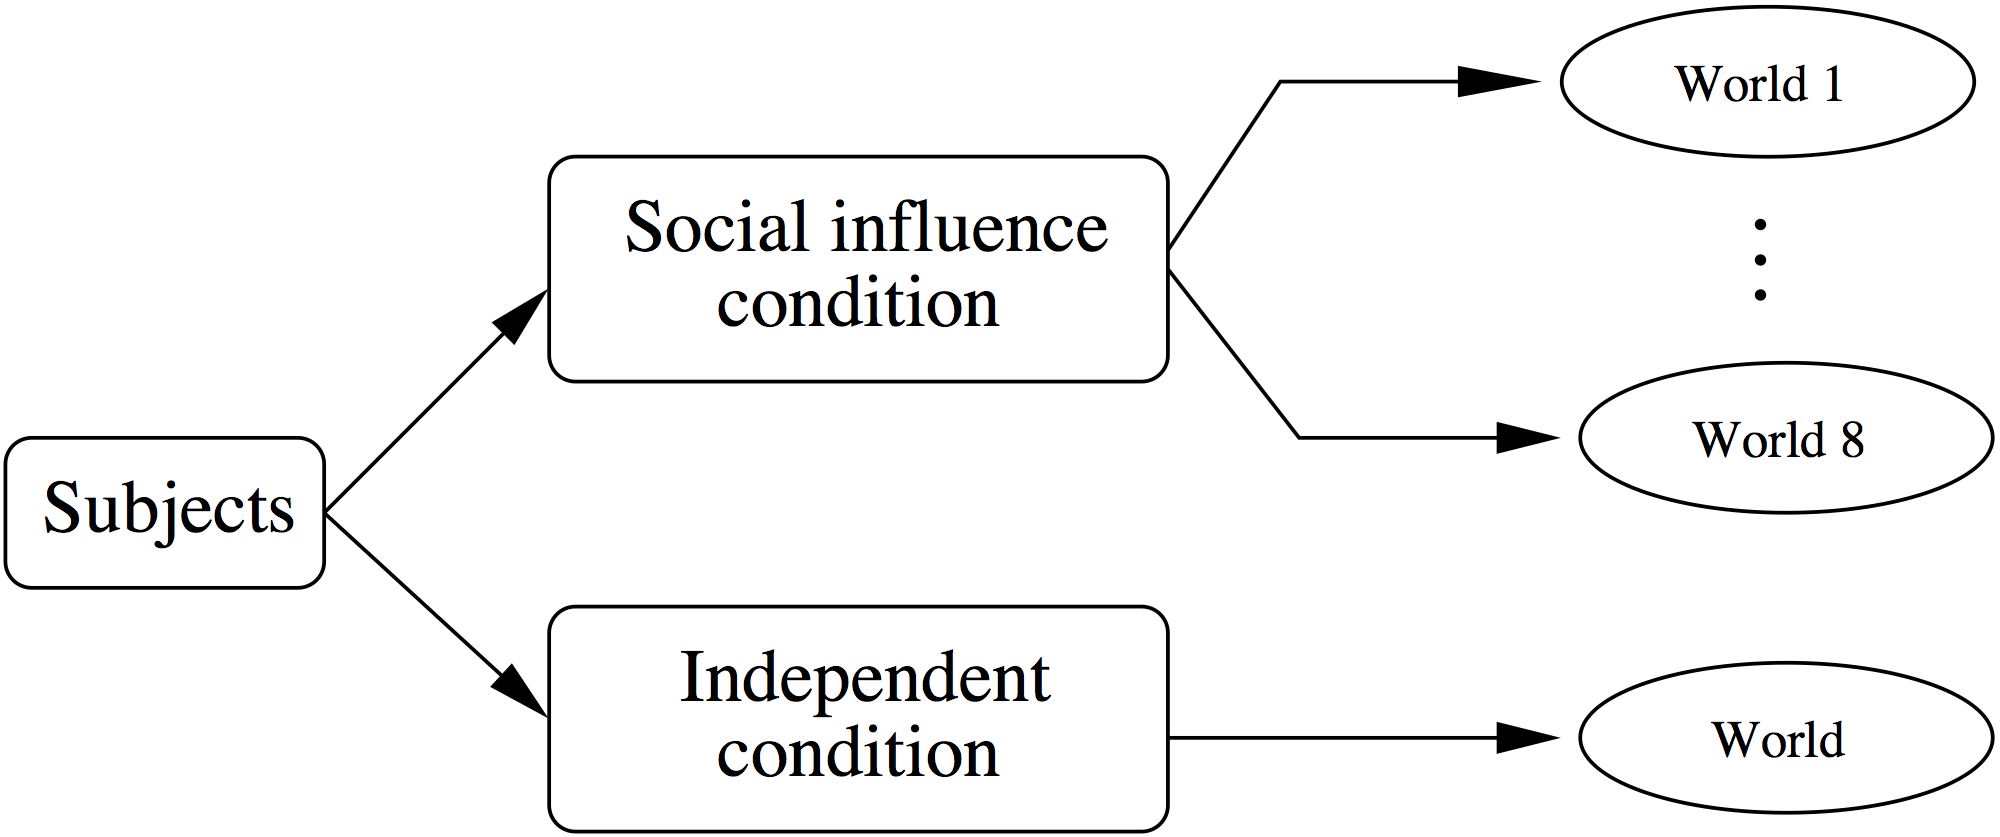 Figure 4.20: Experimental design for the MusicLab experiments (Salganik, Dodds, and Watts 2006). Participants were randomly assigned into one of two conditions: independent and social influence. Participants in the independent condition made their choices without any information about what other people had done. Participants in the social influence condition were randomly assigned into one of eight parallel worlds, where they could see the popularity—as measured by downloads of previous participants—of each song in their world, but they could not see any information, nor did they even know about the existence of, any of the other worlds.